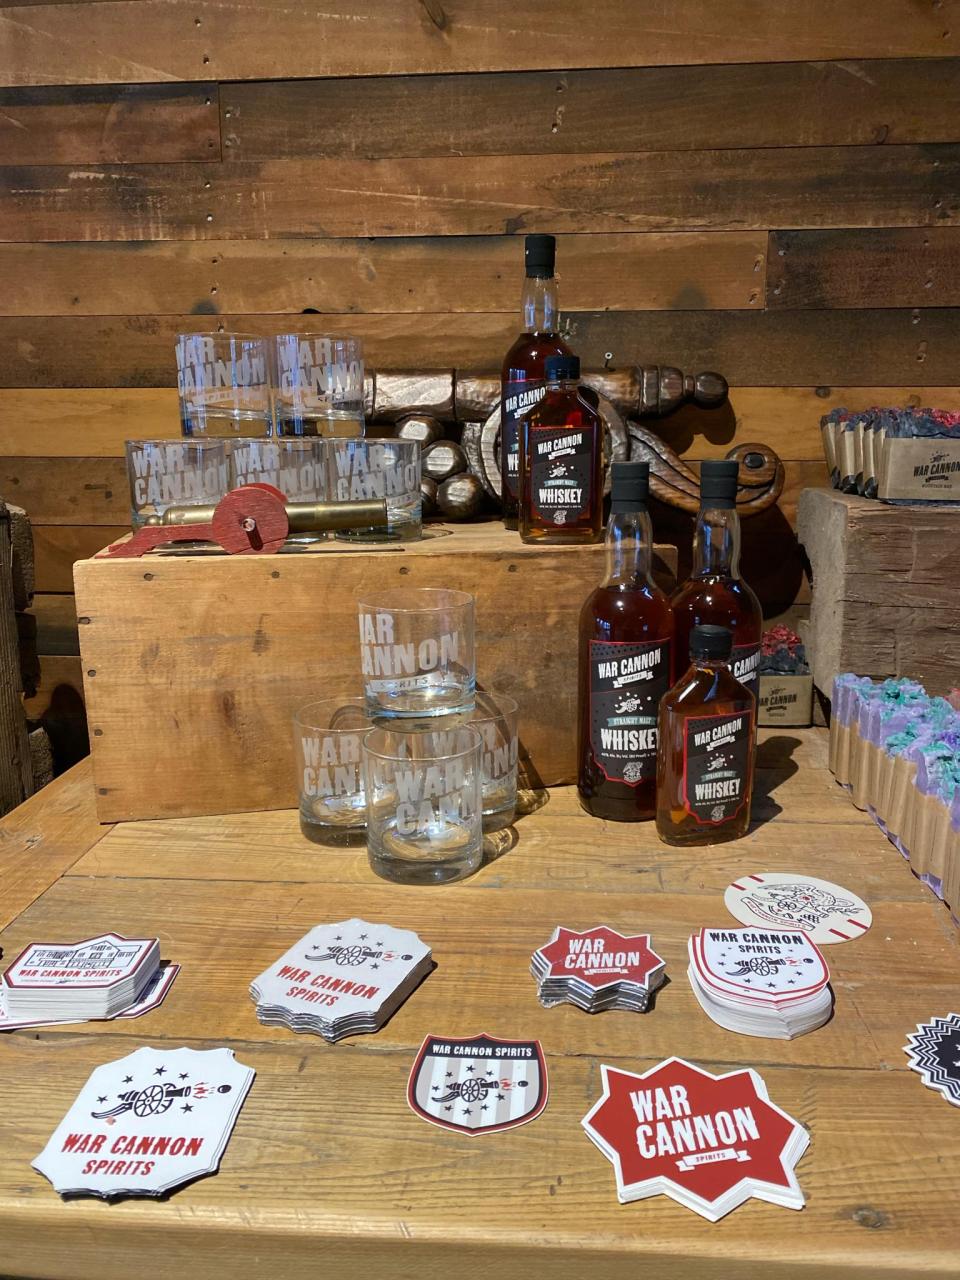 A display of War Cannon Spirits products including spirits, drinking glasses, stickers, and spirit-infused soaps